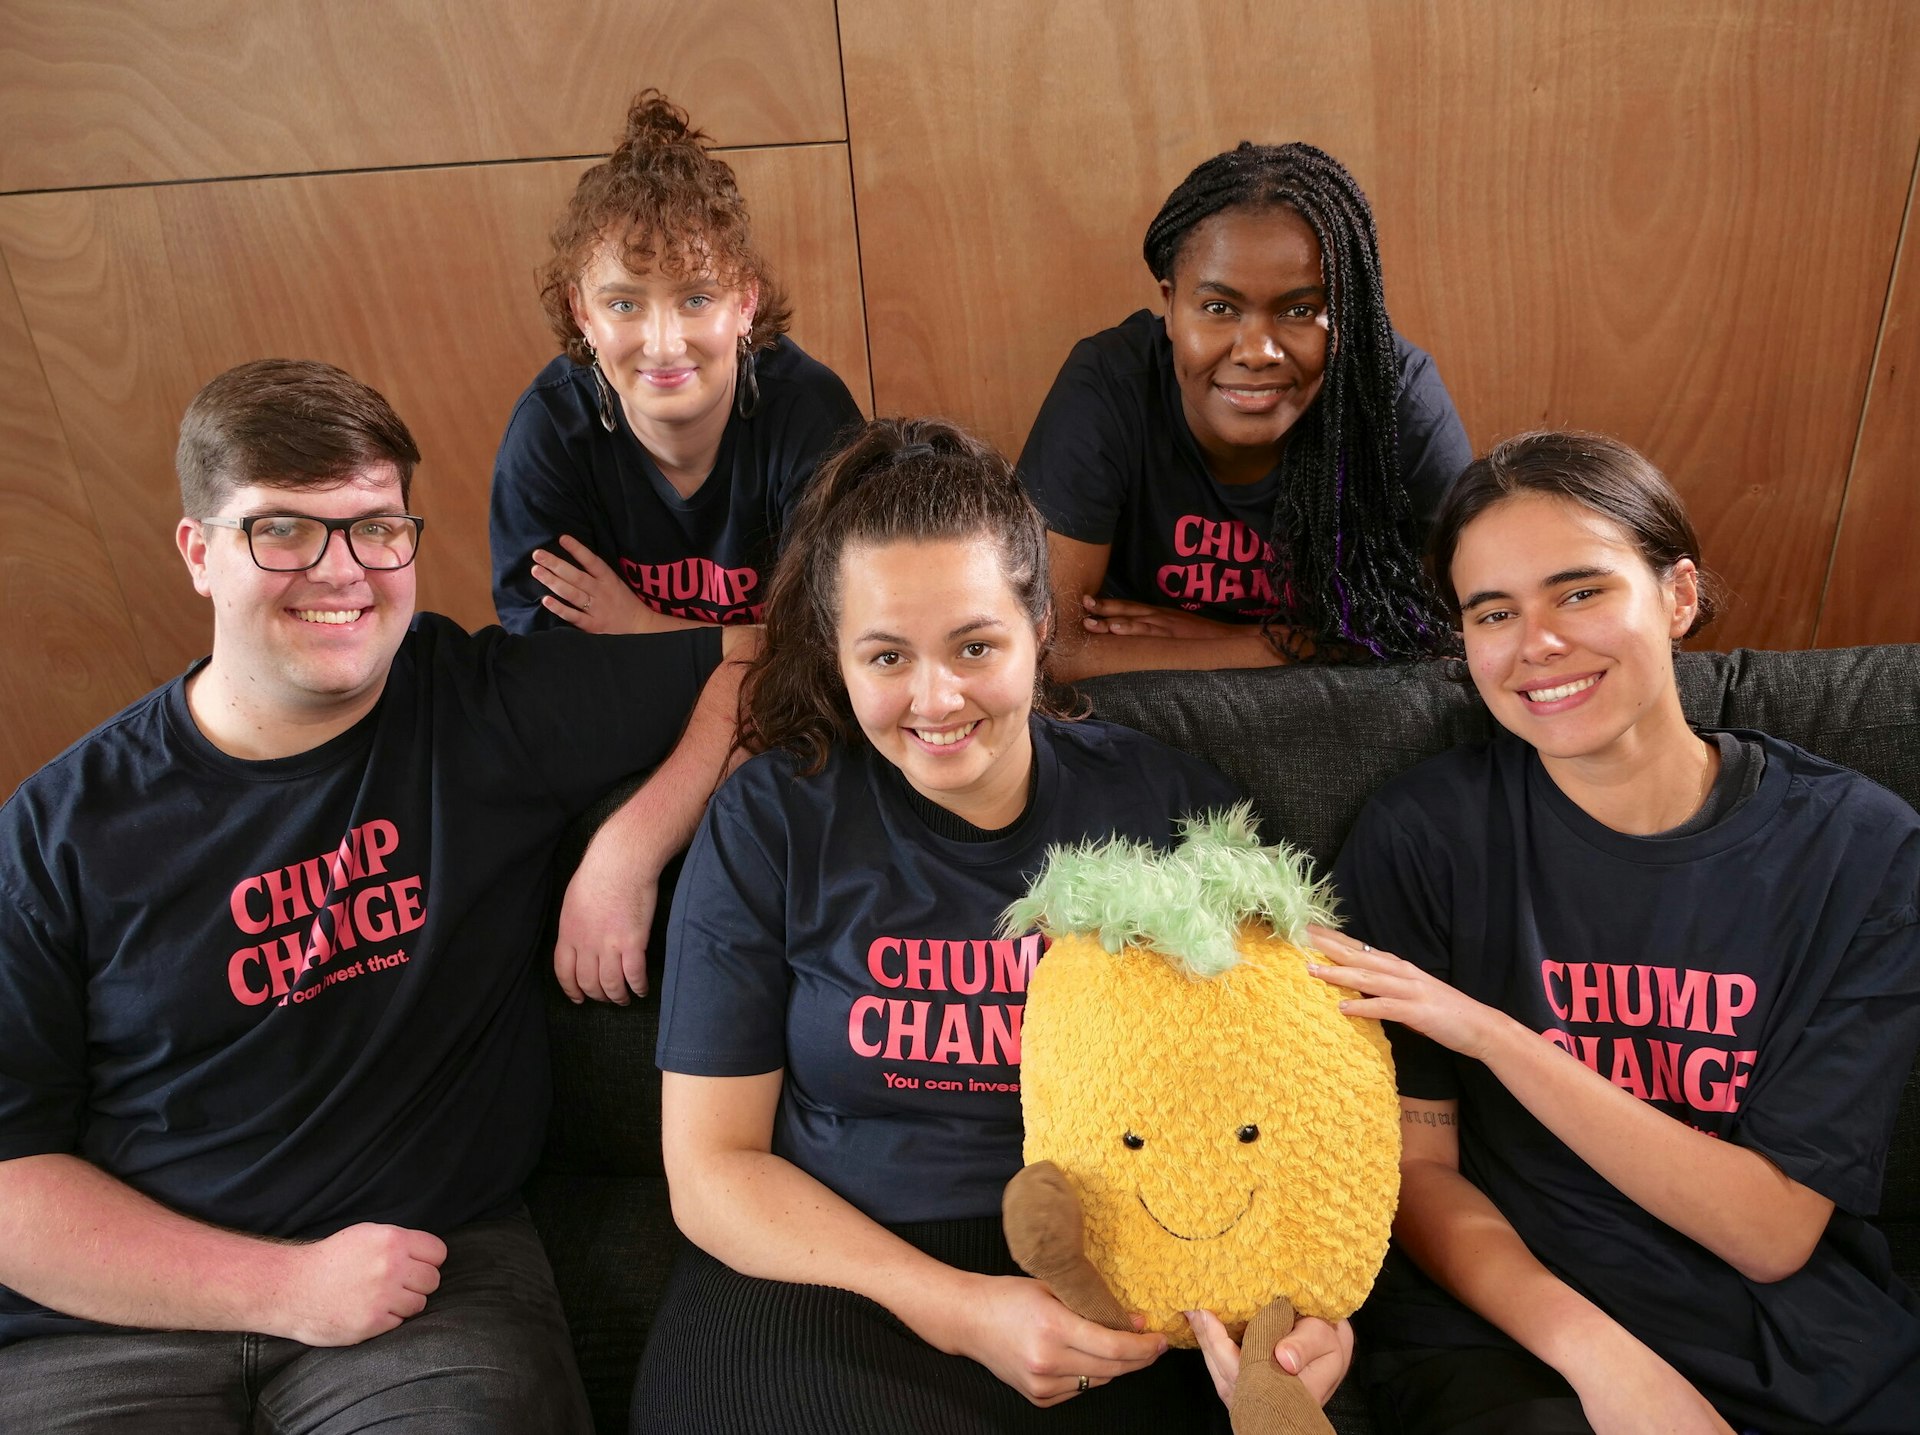 Five interns and a pineapple!